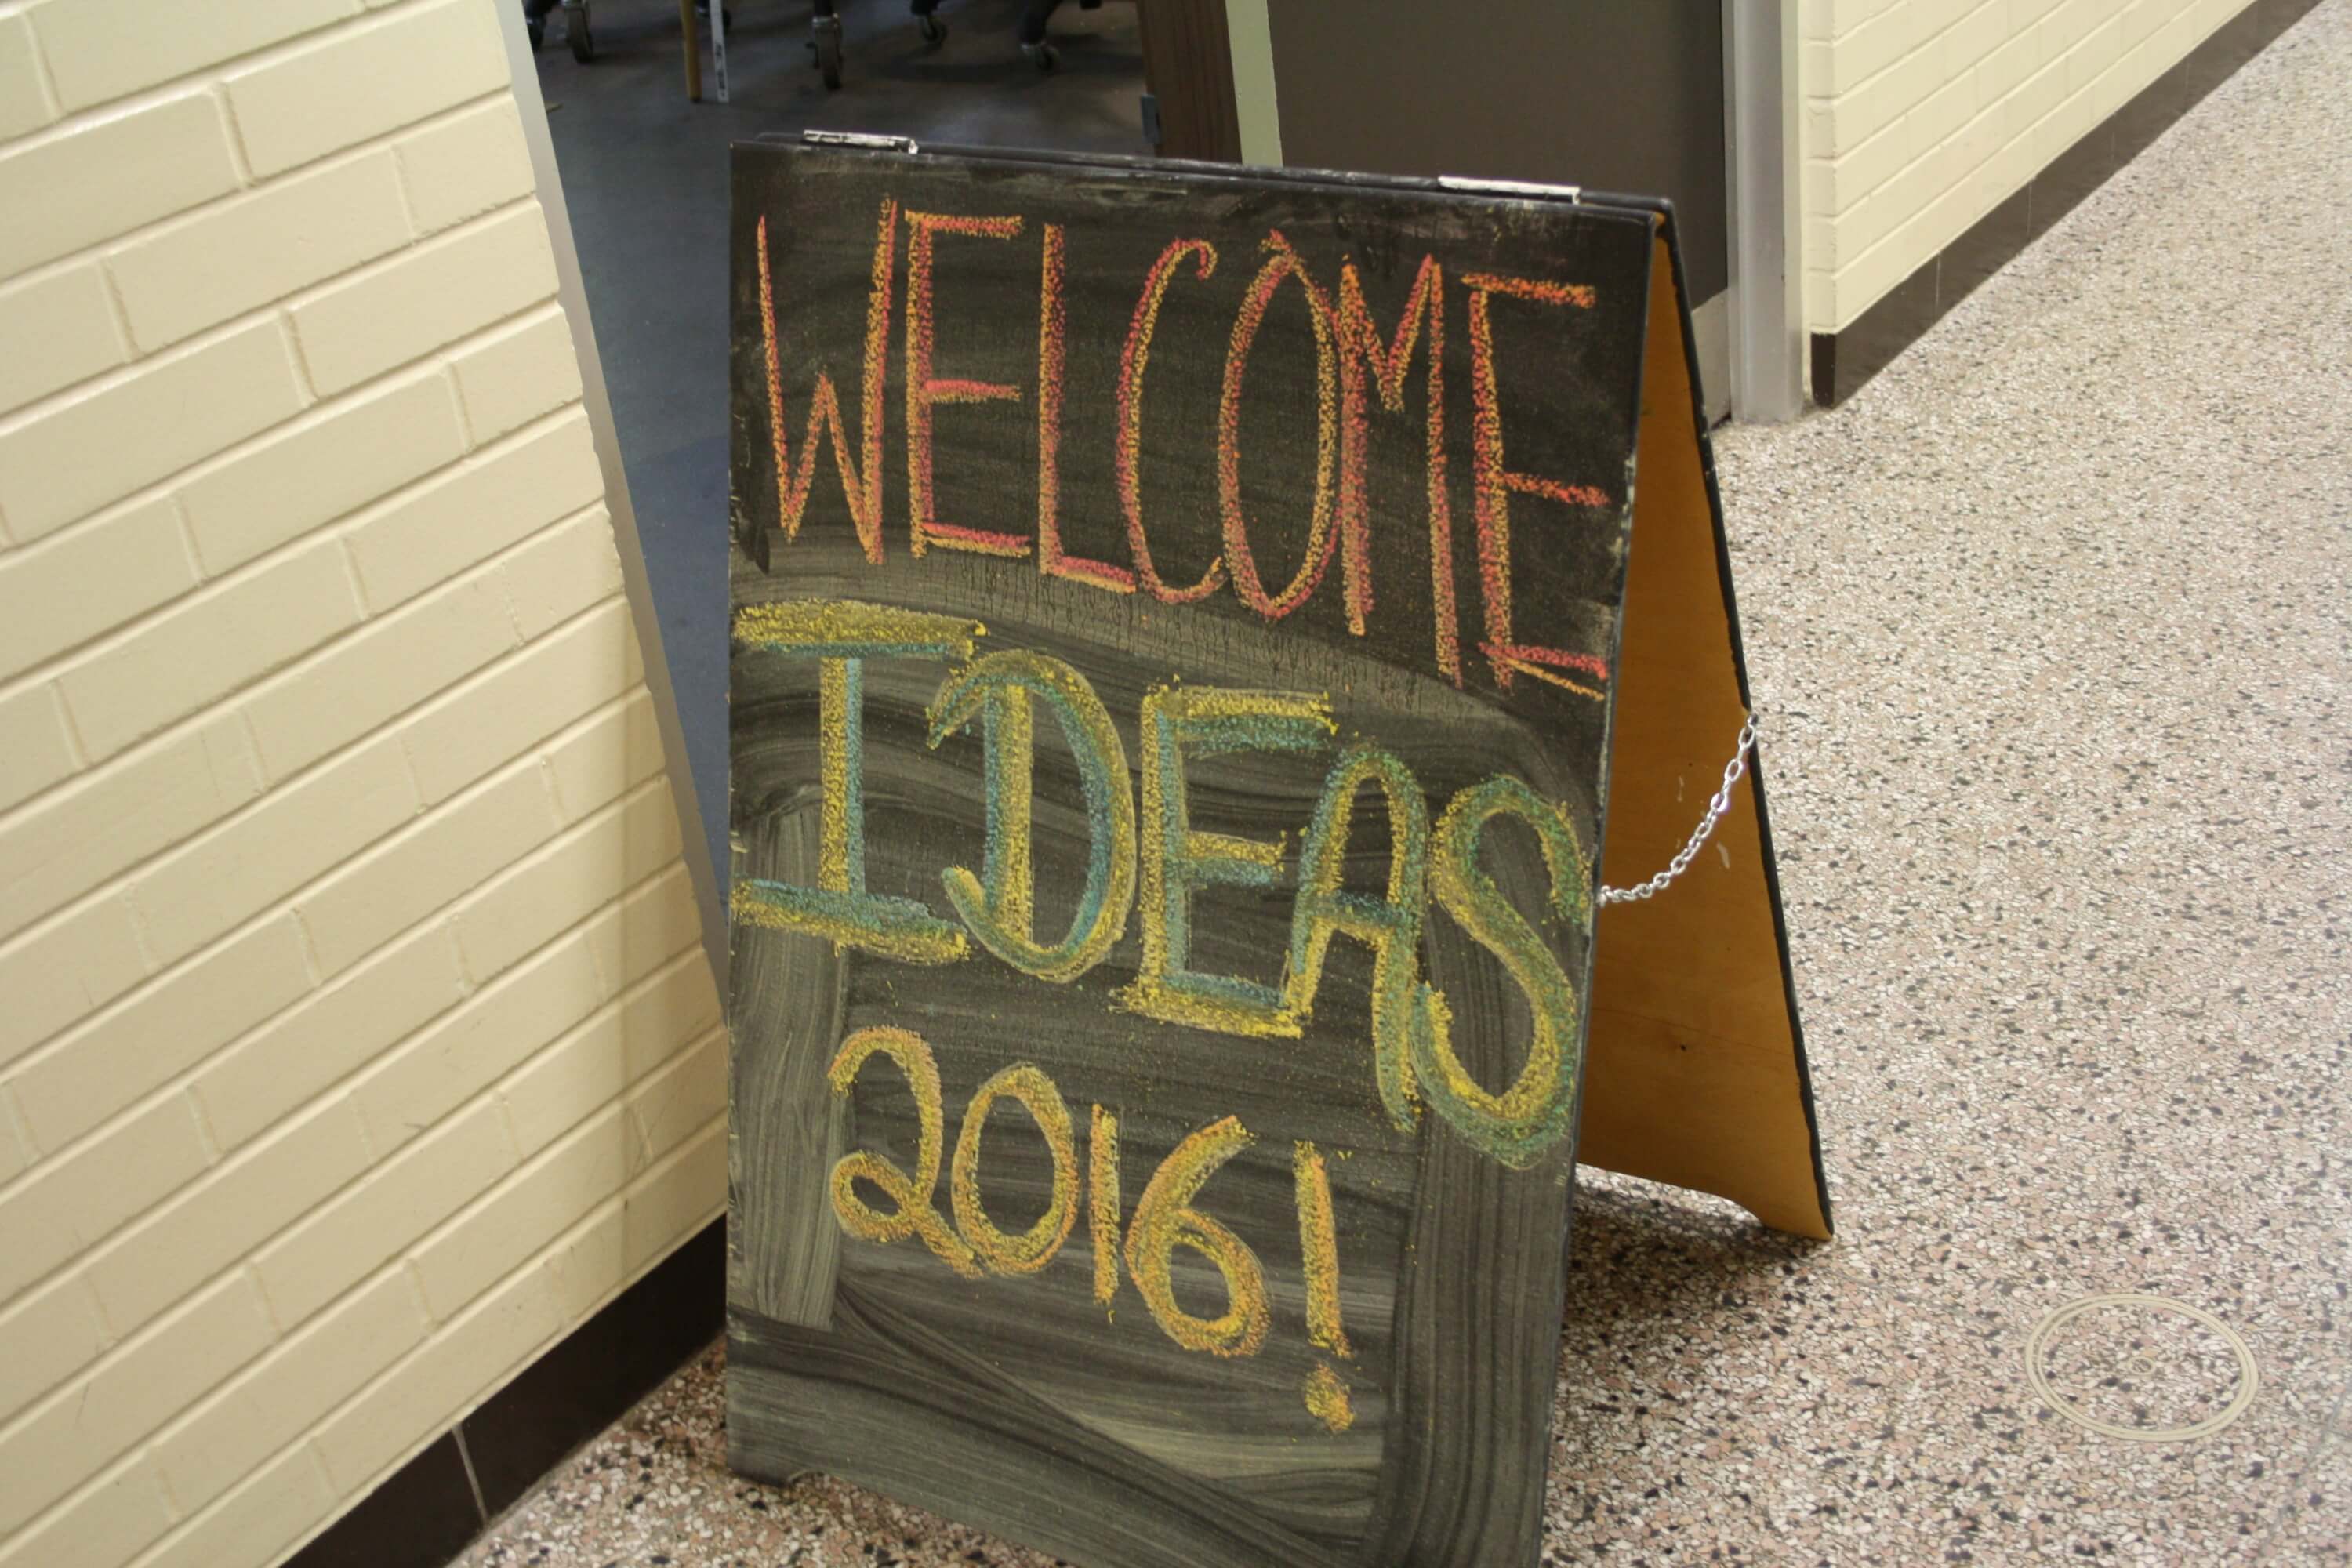 Chalkboard sign with "Welcome IDEAS 2016!" written on it